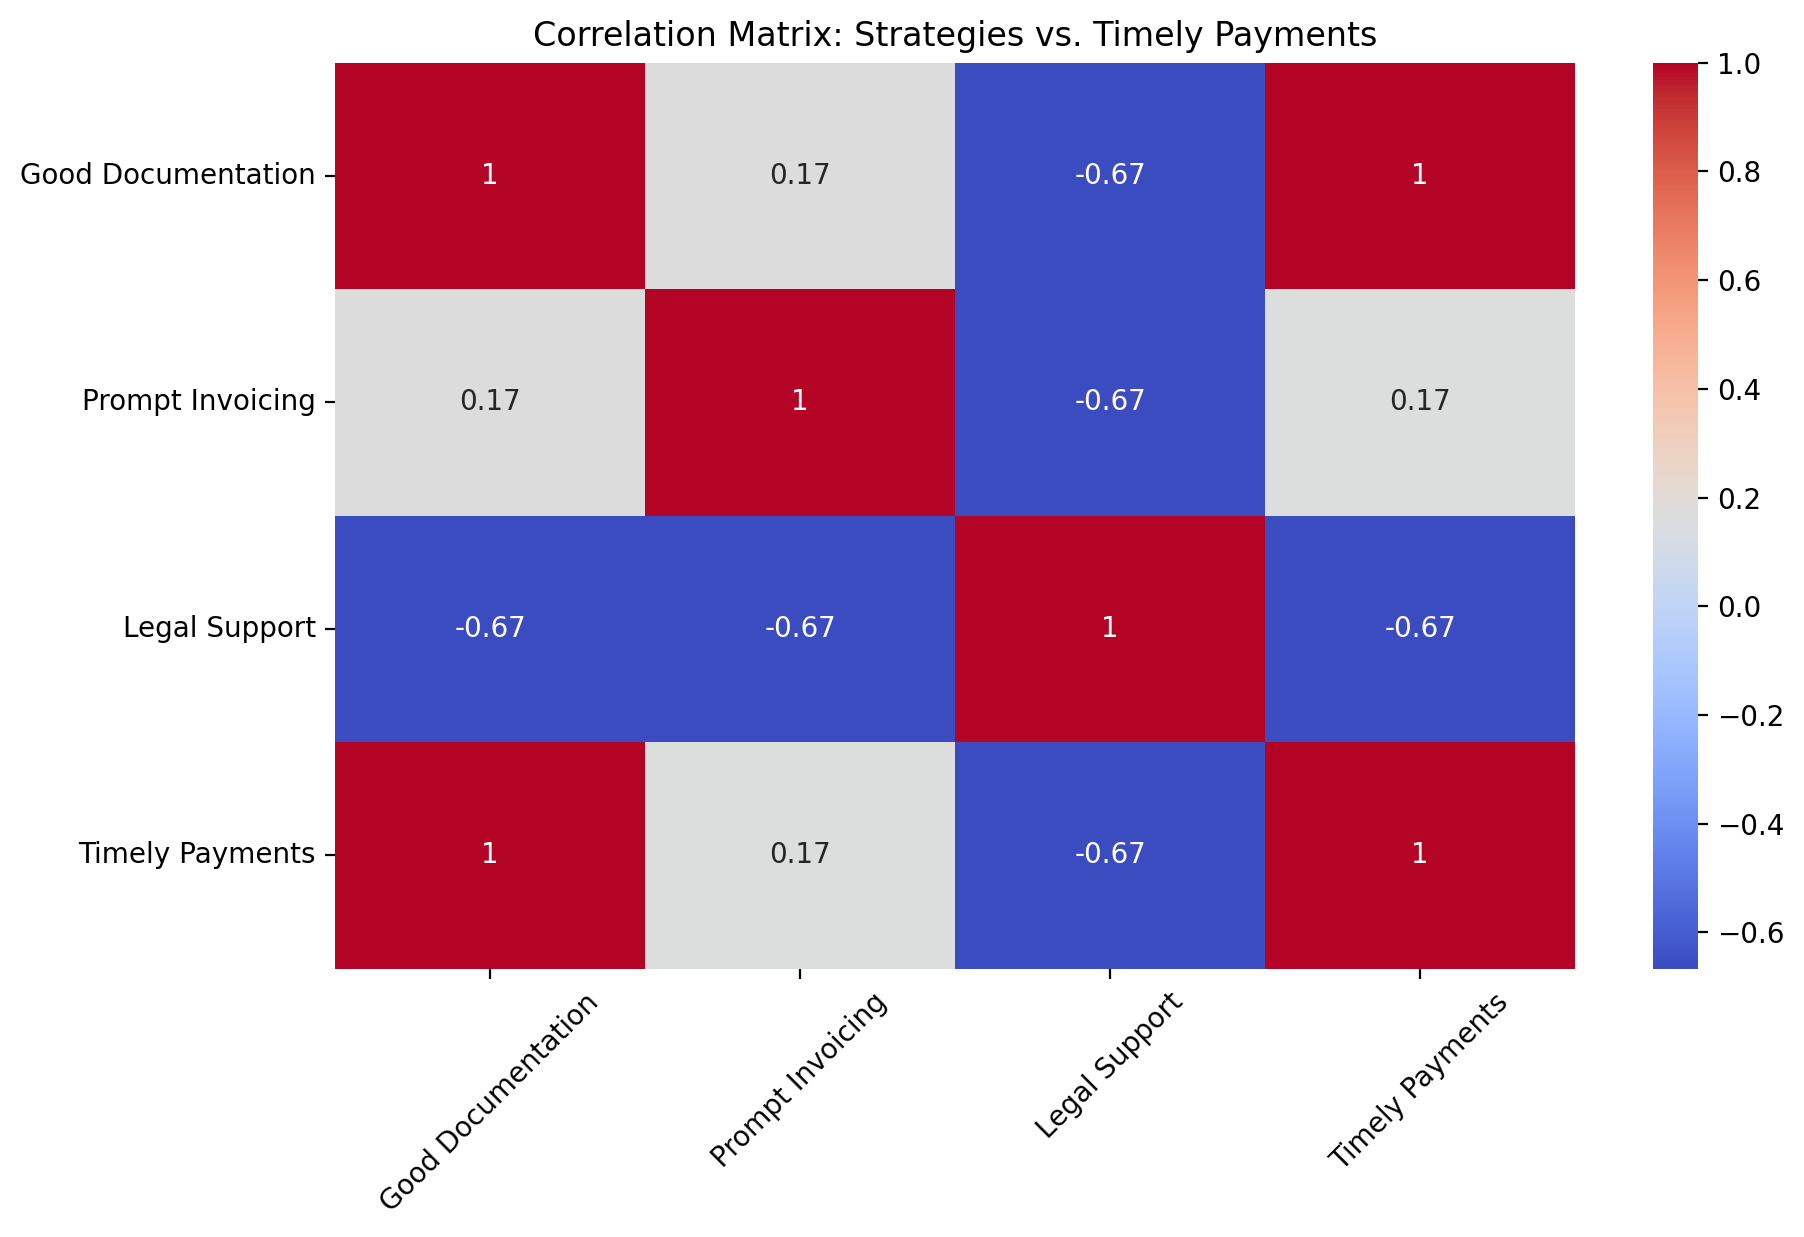 A correlation matrix can help see how different strategies, starting with good documentation, correlate with timely payments. This could be based on a regression analysis of several construction projects.